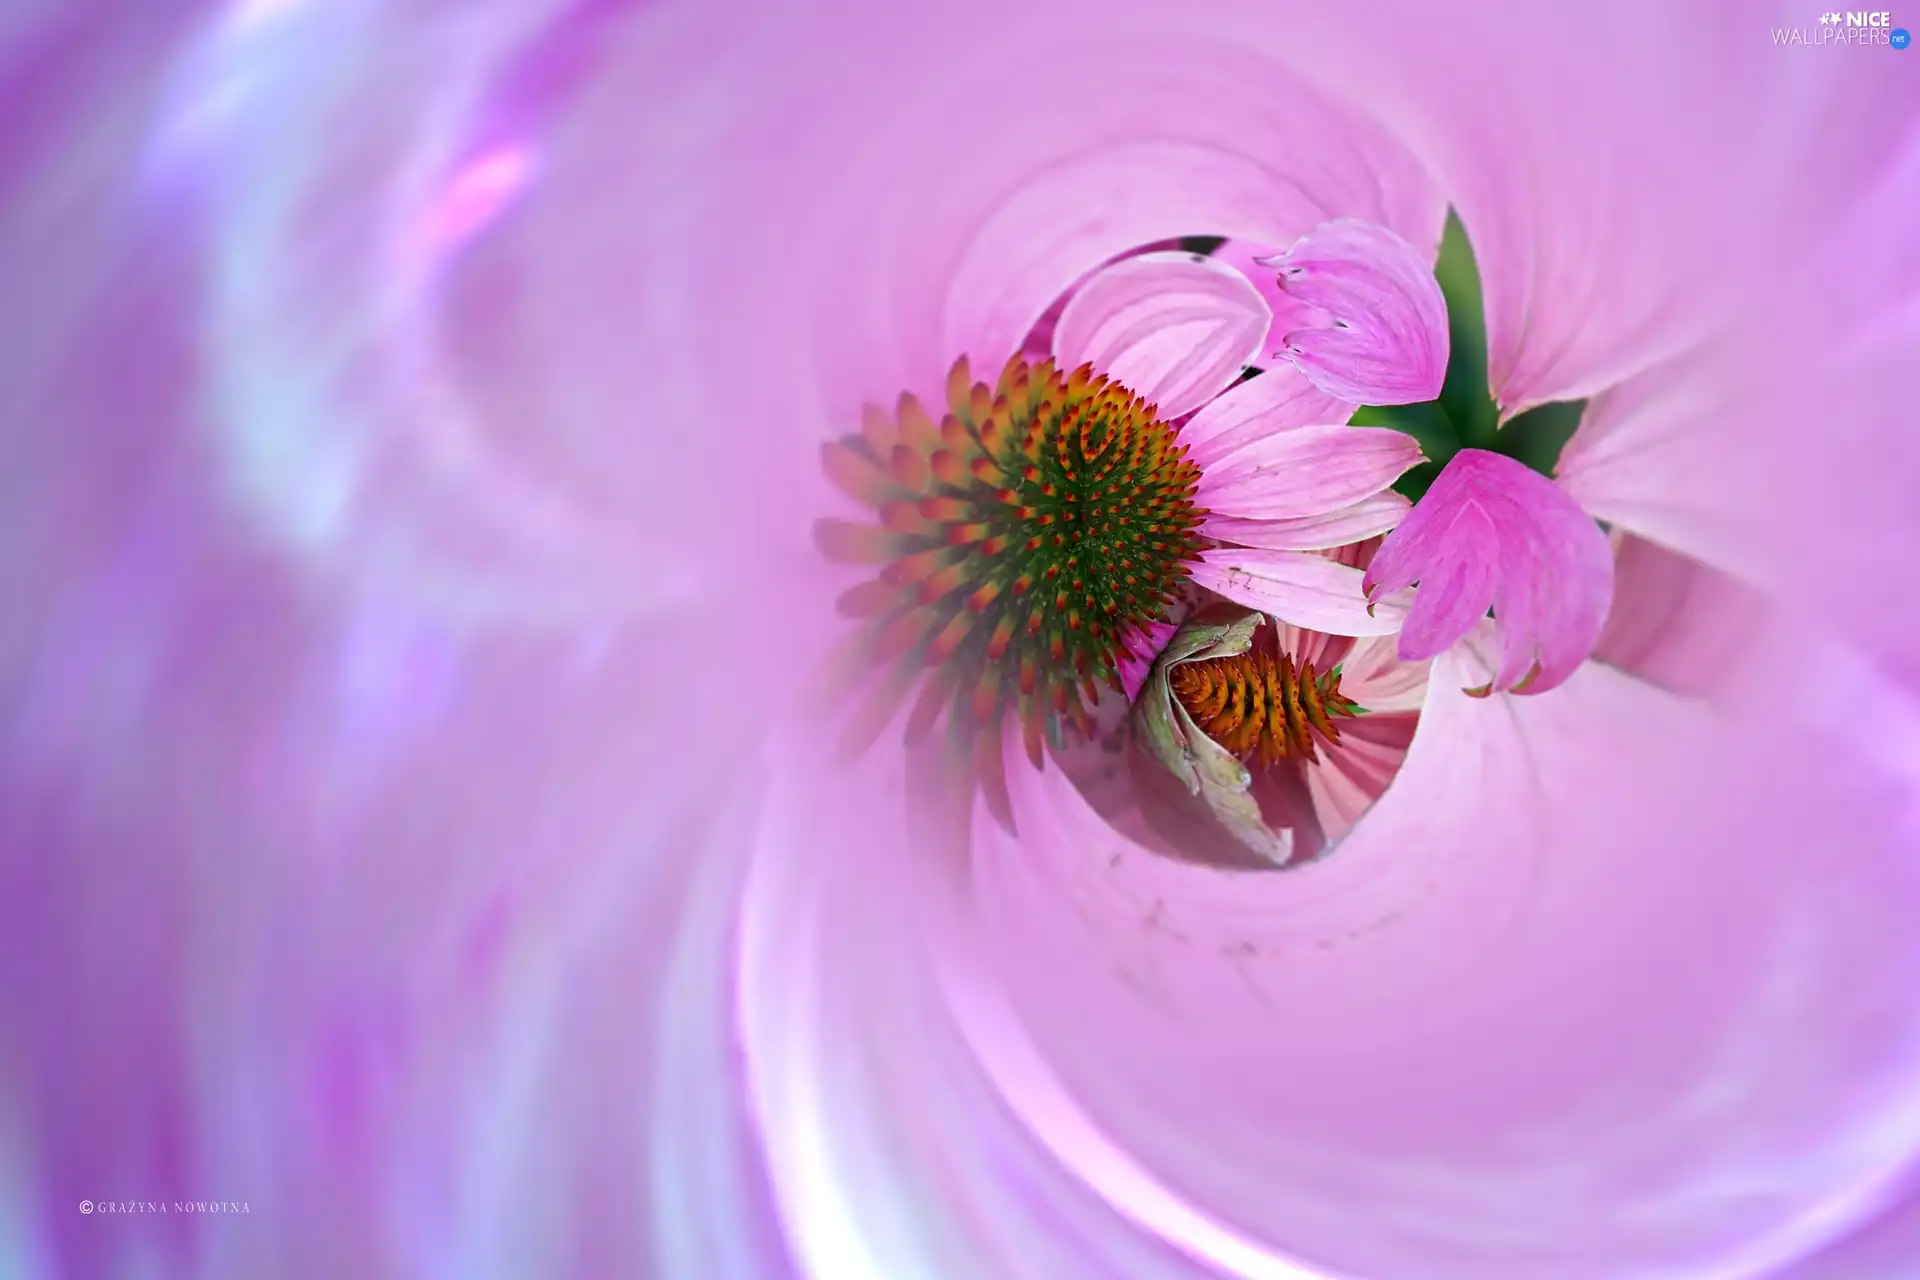 Flowers, abstraction, graphics